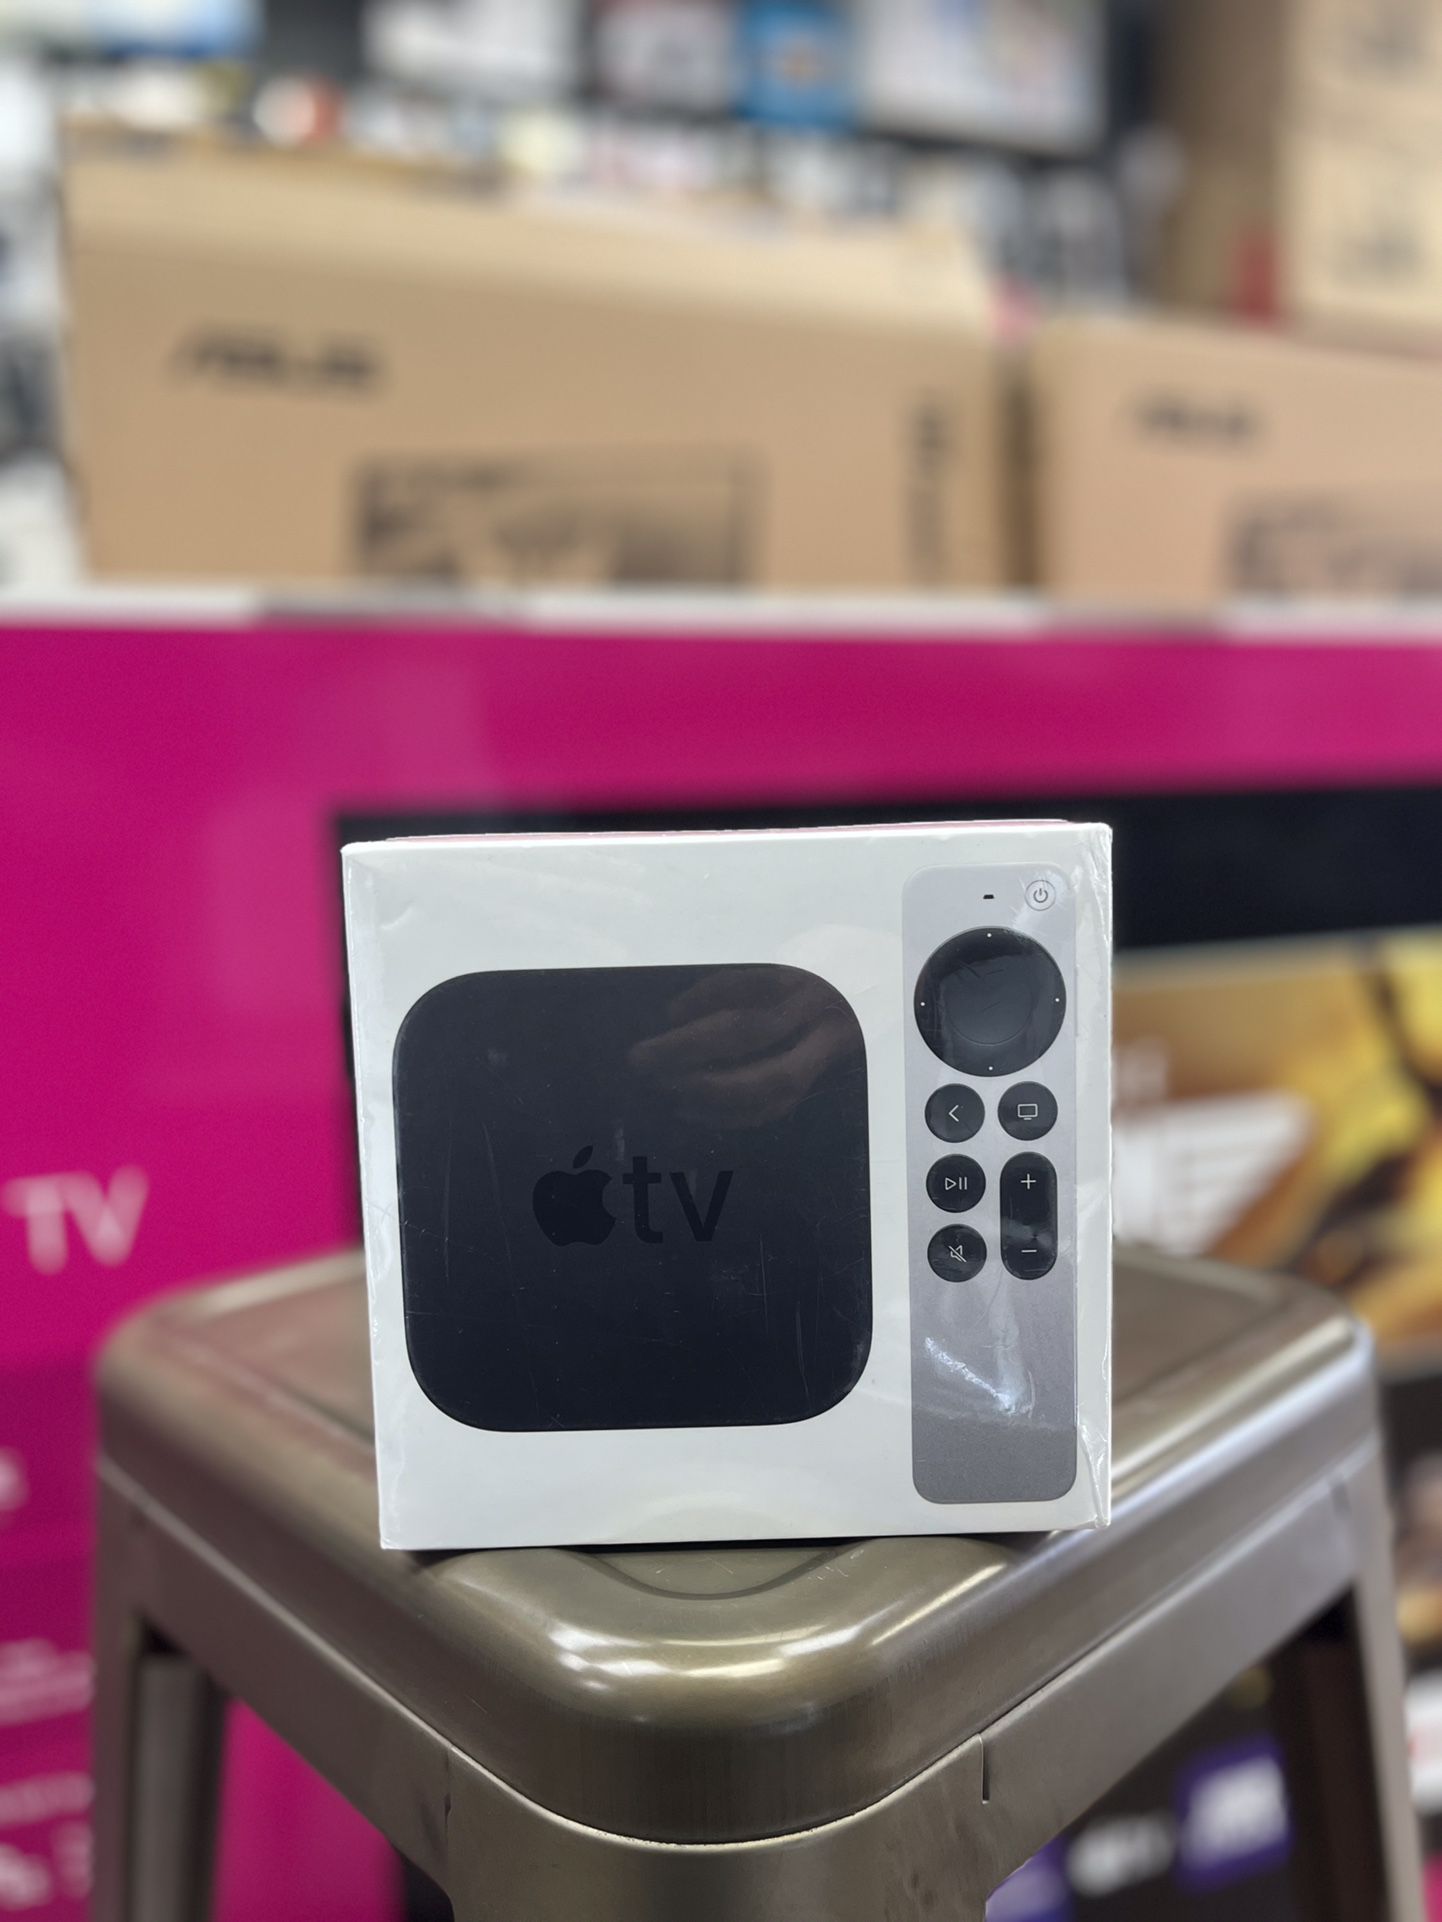 Apple TV Remote Available